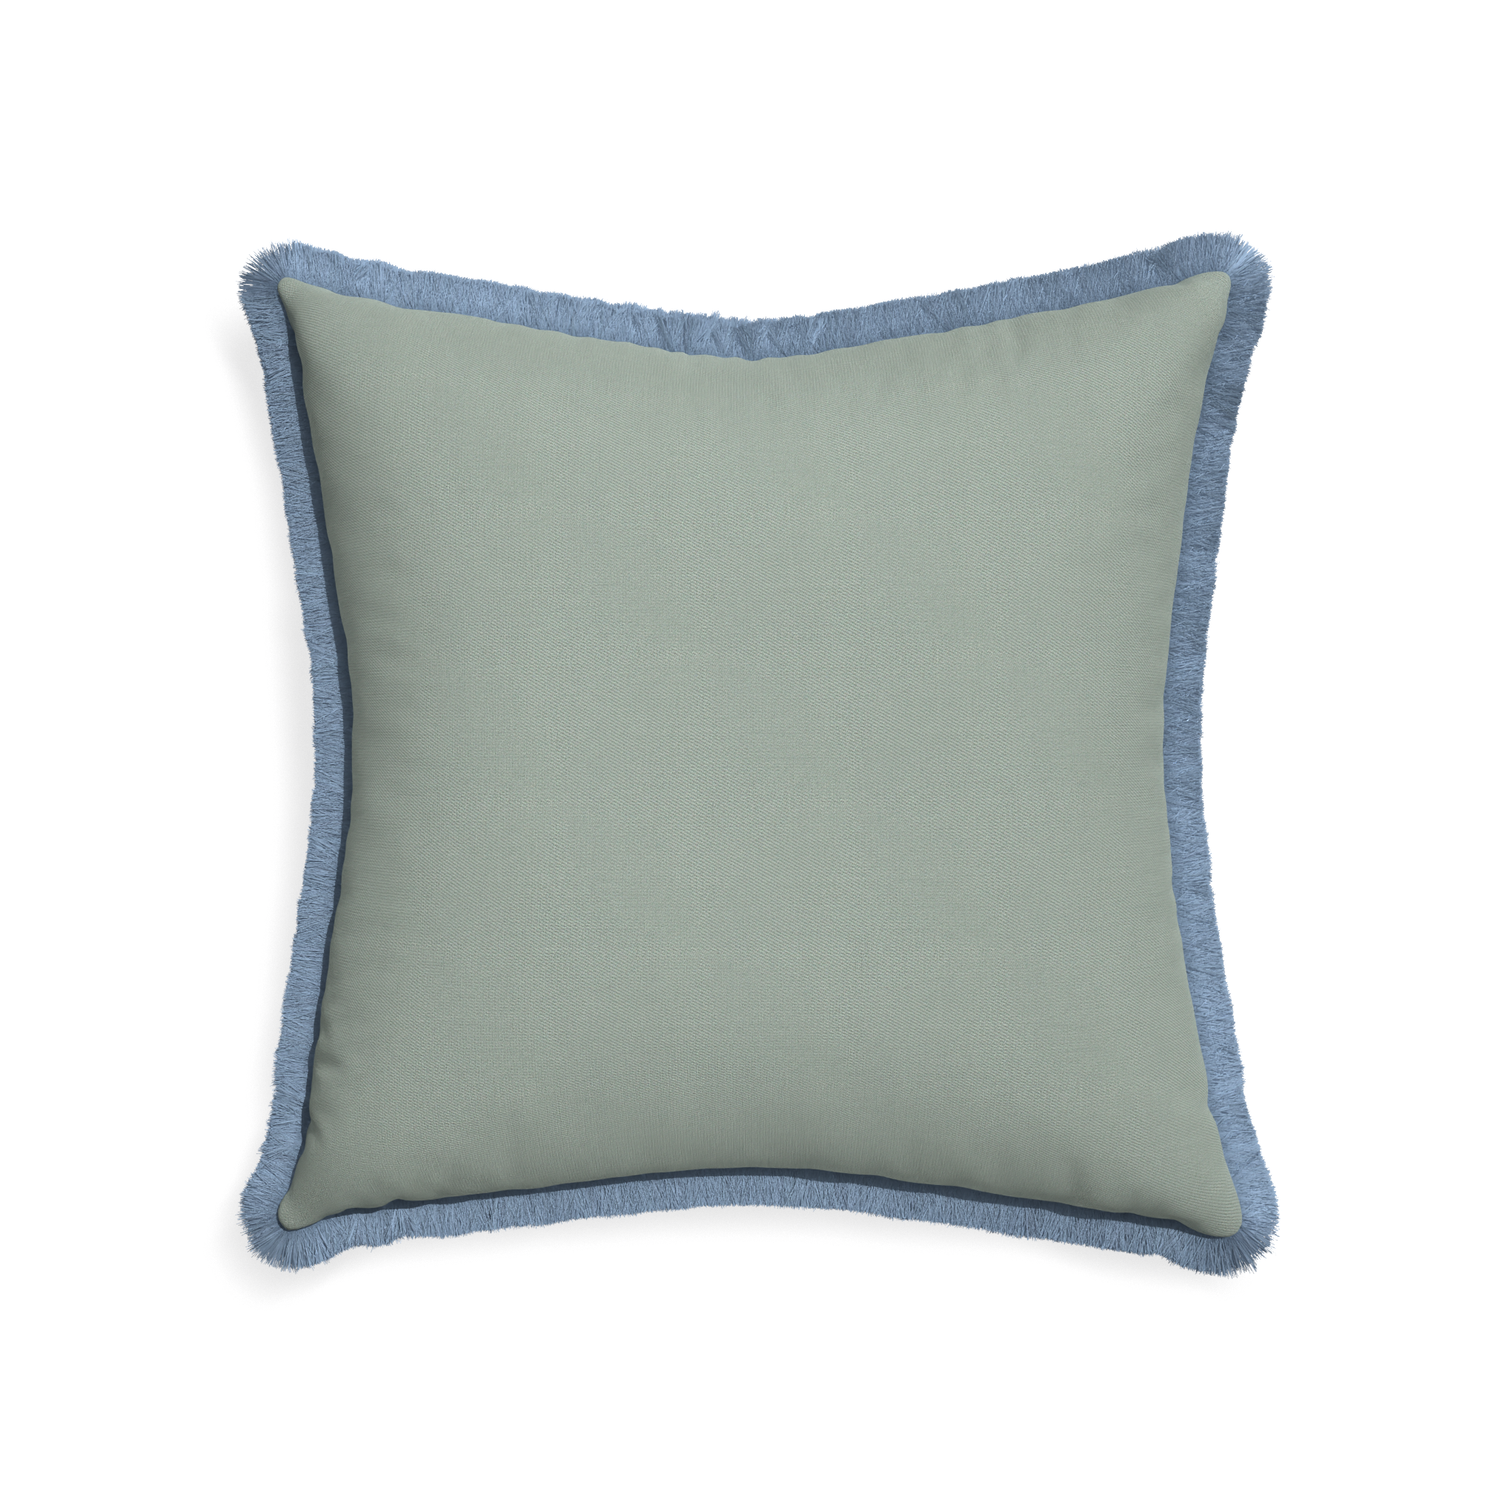 22-square sage custom pillow with sky fringe on white background